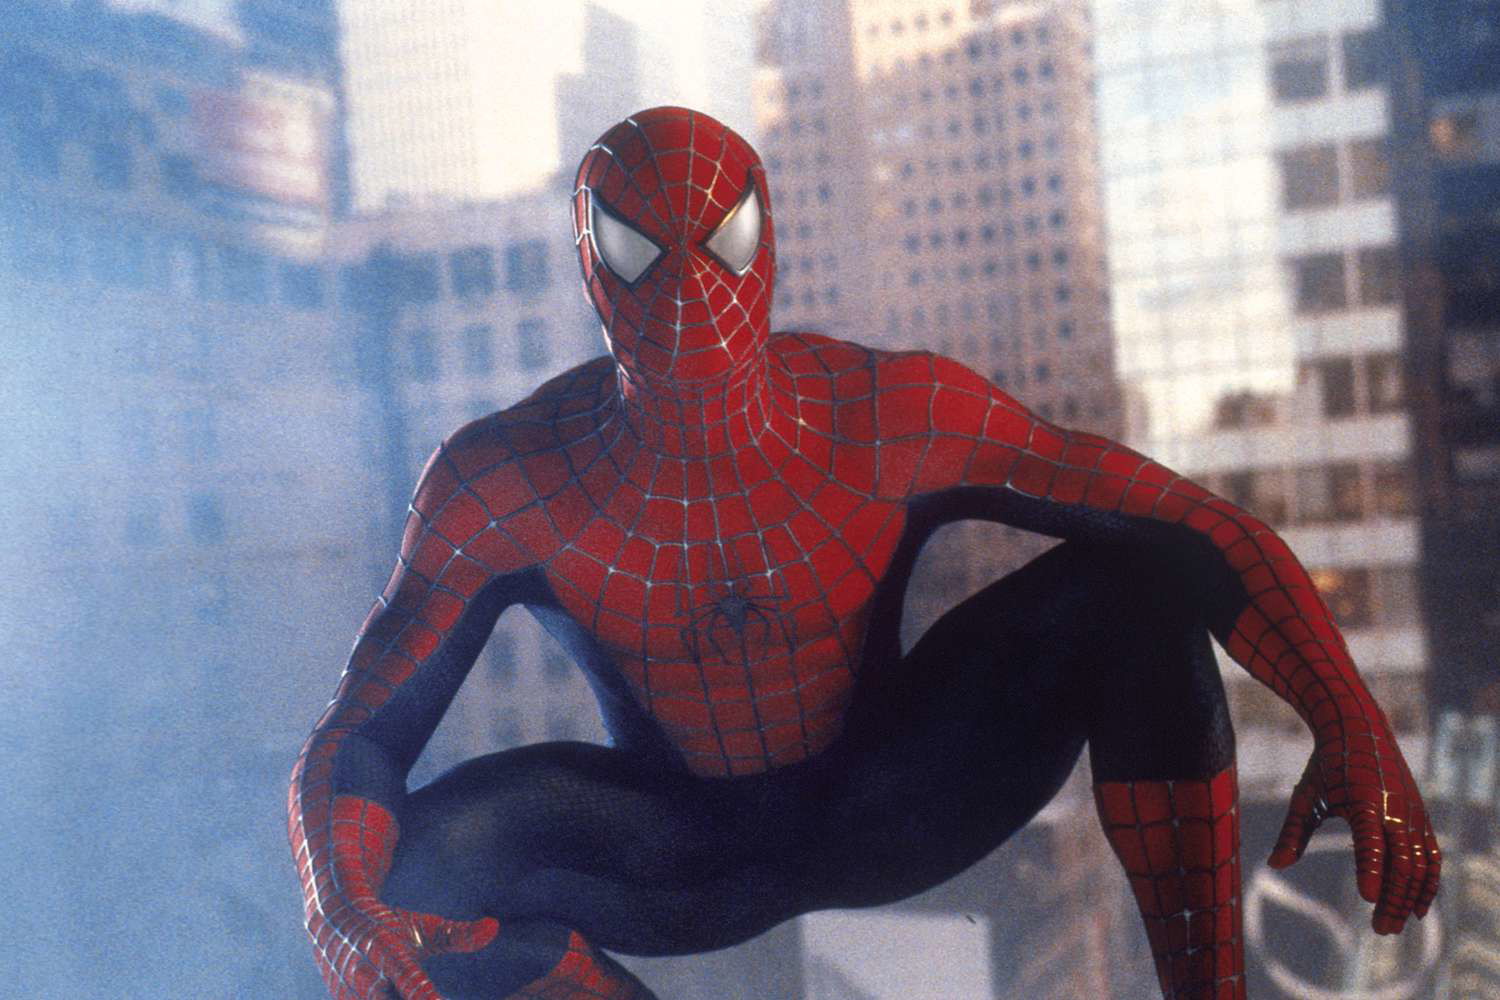 A still showcasing Tobey Maguire's Spider-Man suit